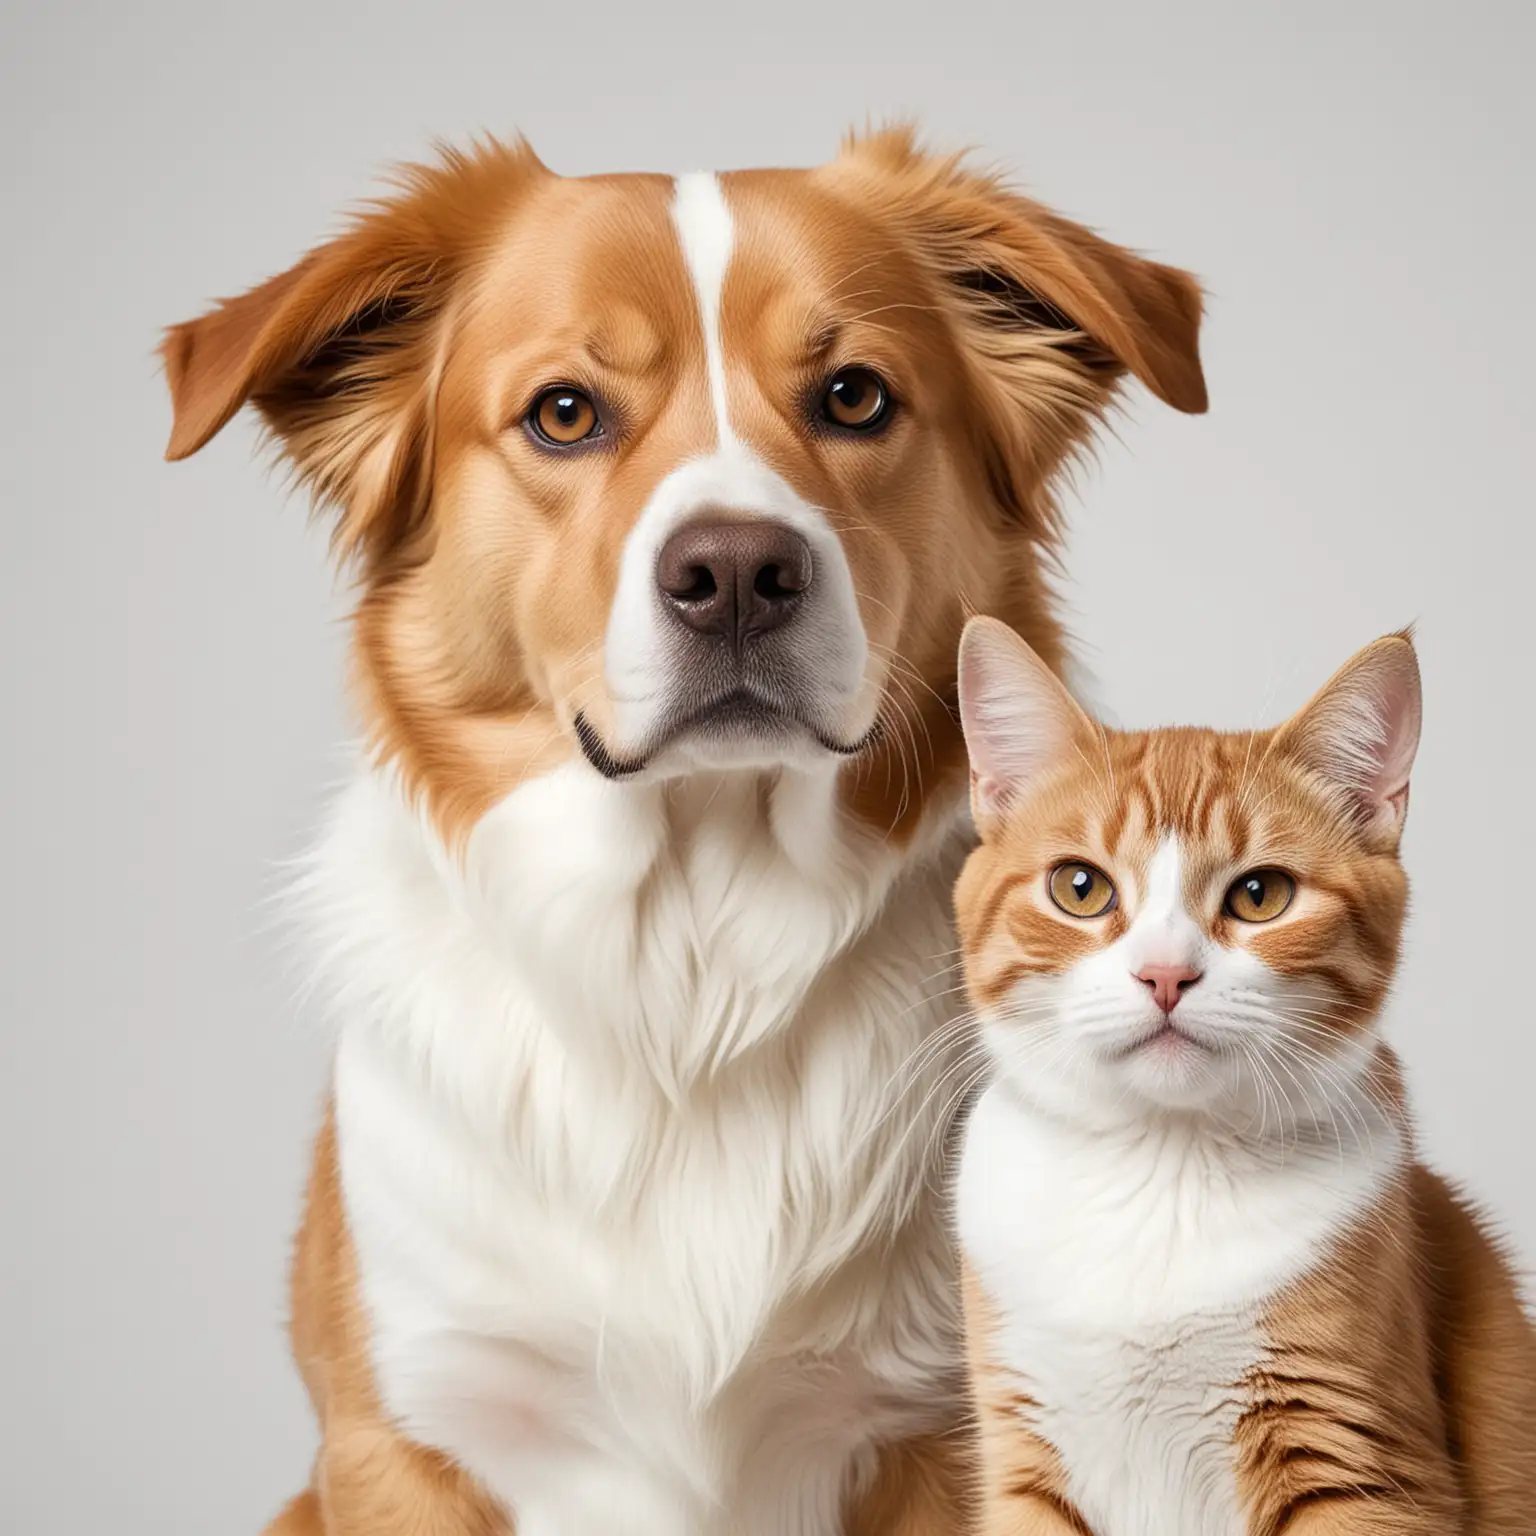 Playful Dog and Cat against White Background